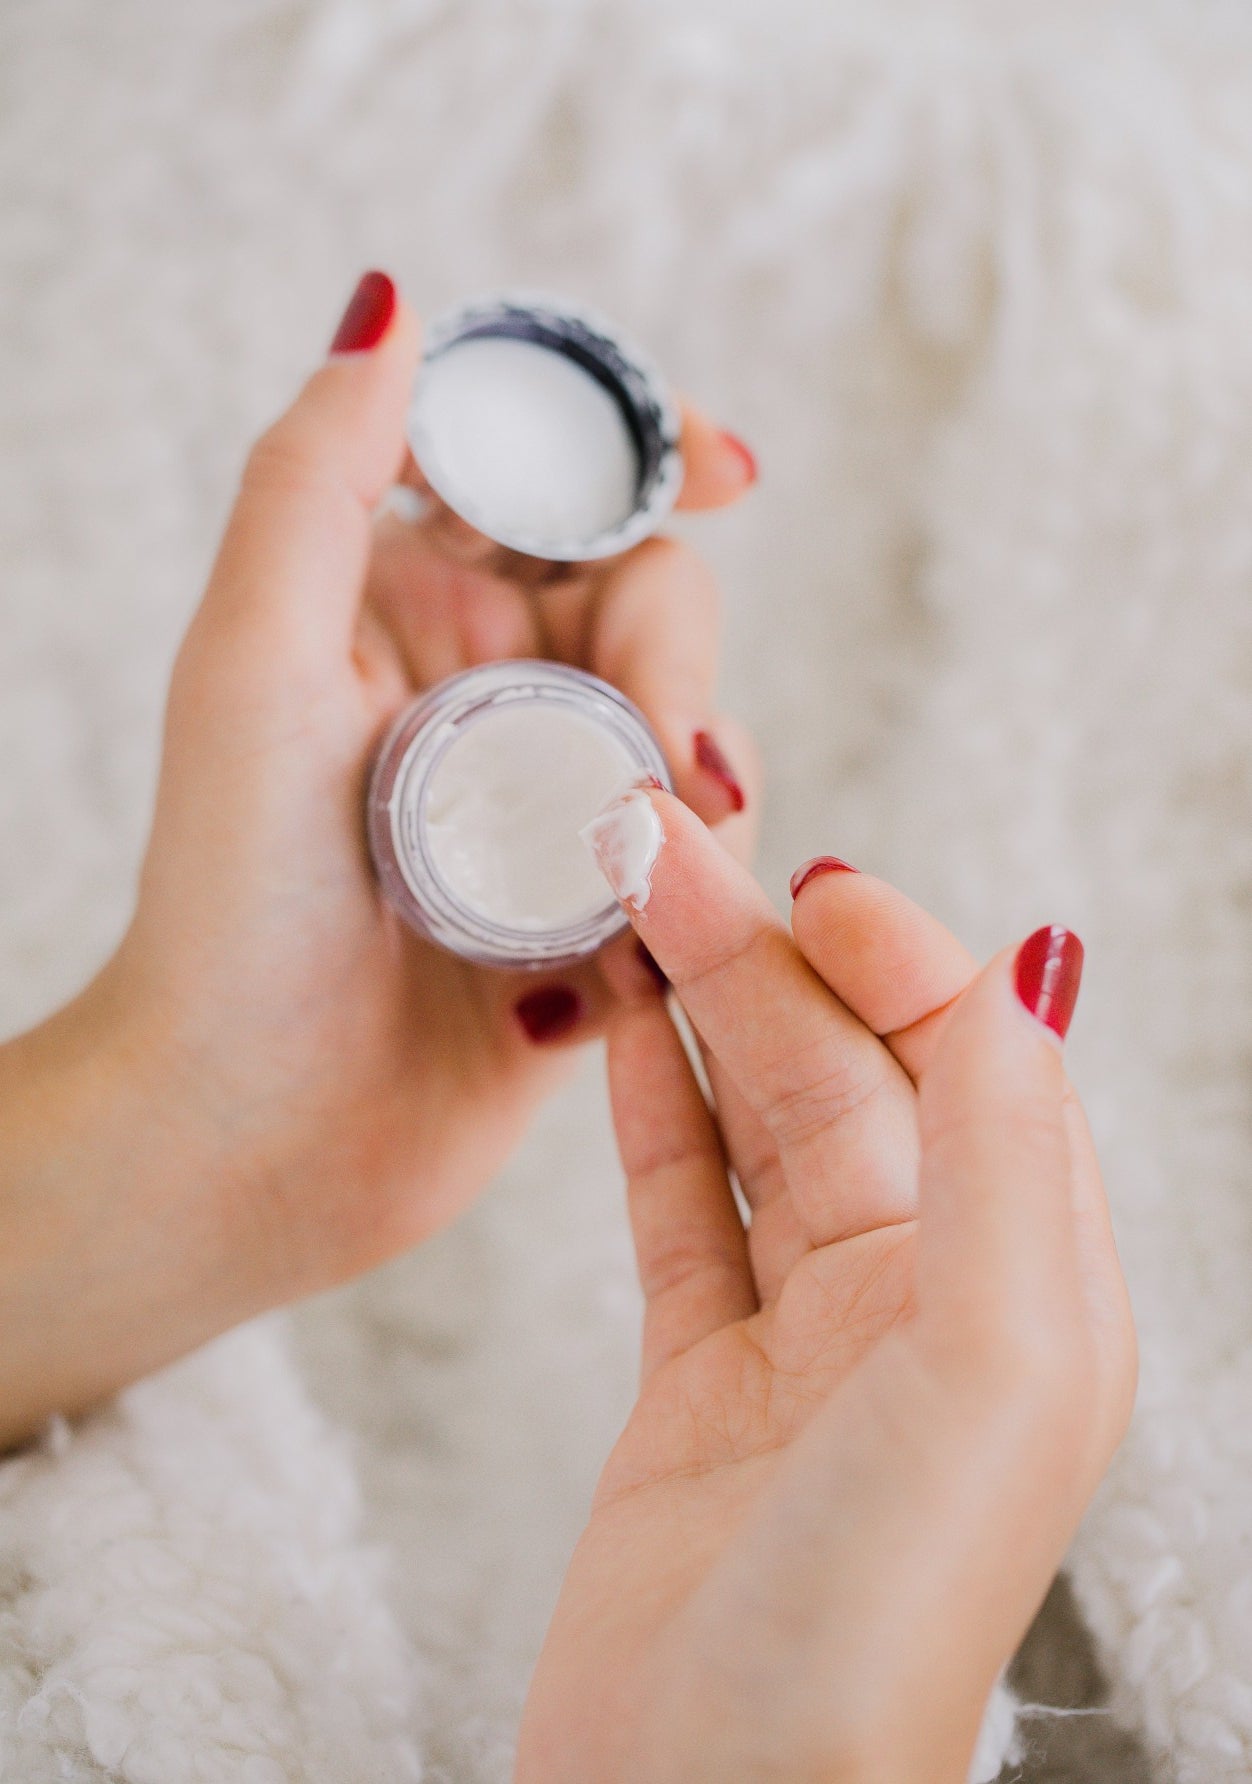 Hands holding a small cosmetics jar